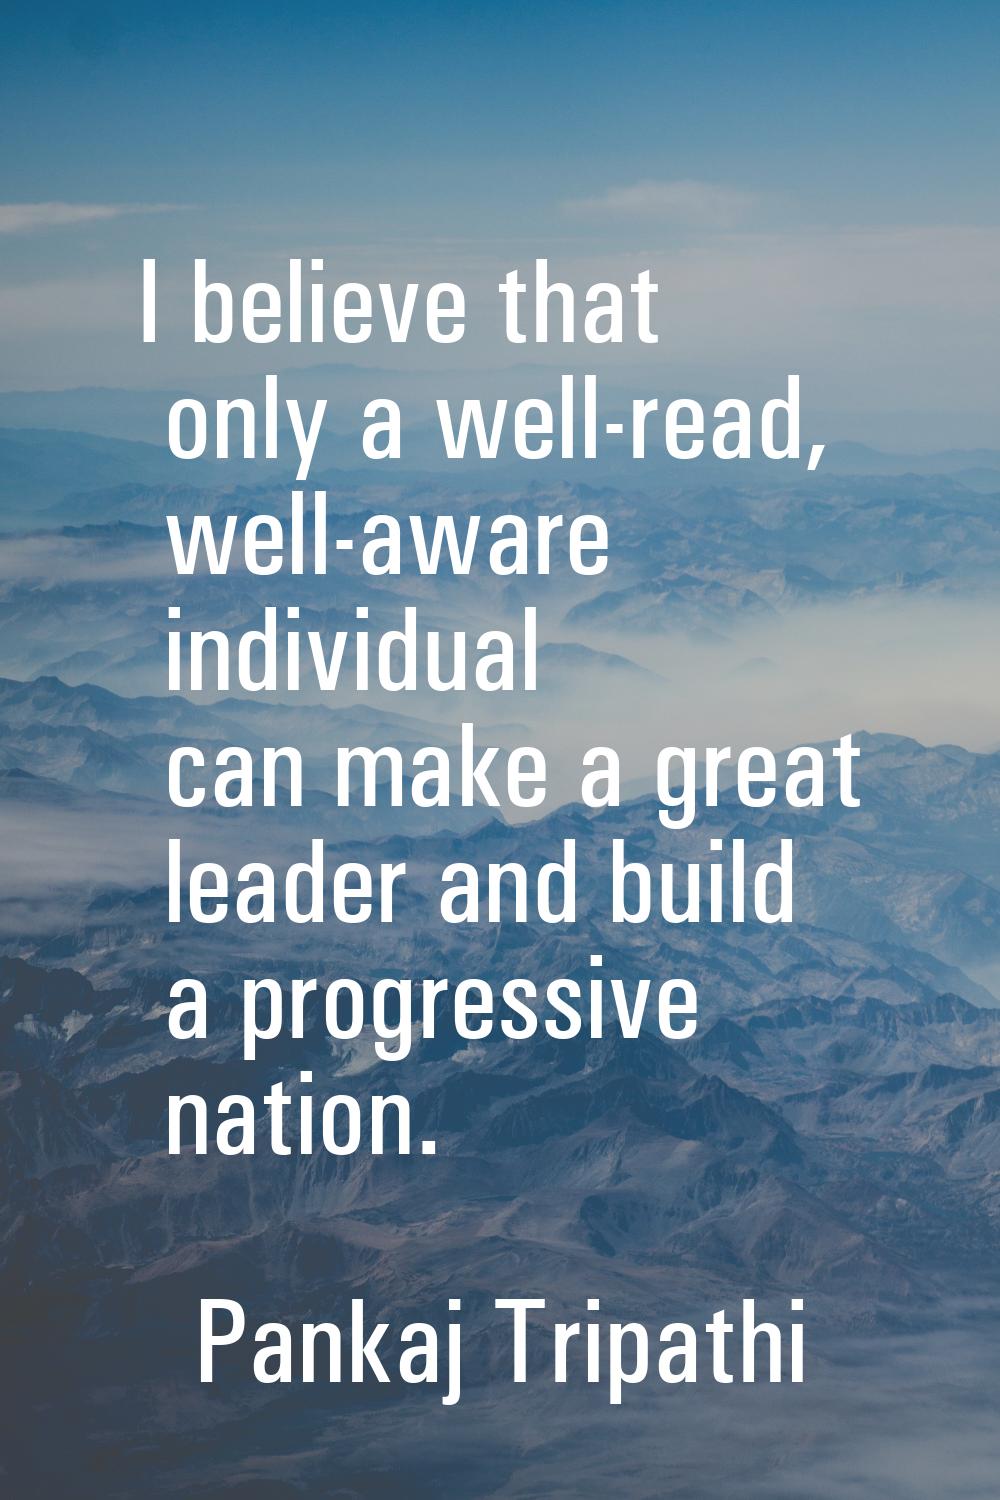 I believe that only a well-read, well-aware individual can make a great leader and build a progress